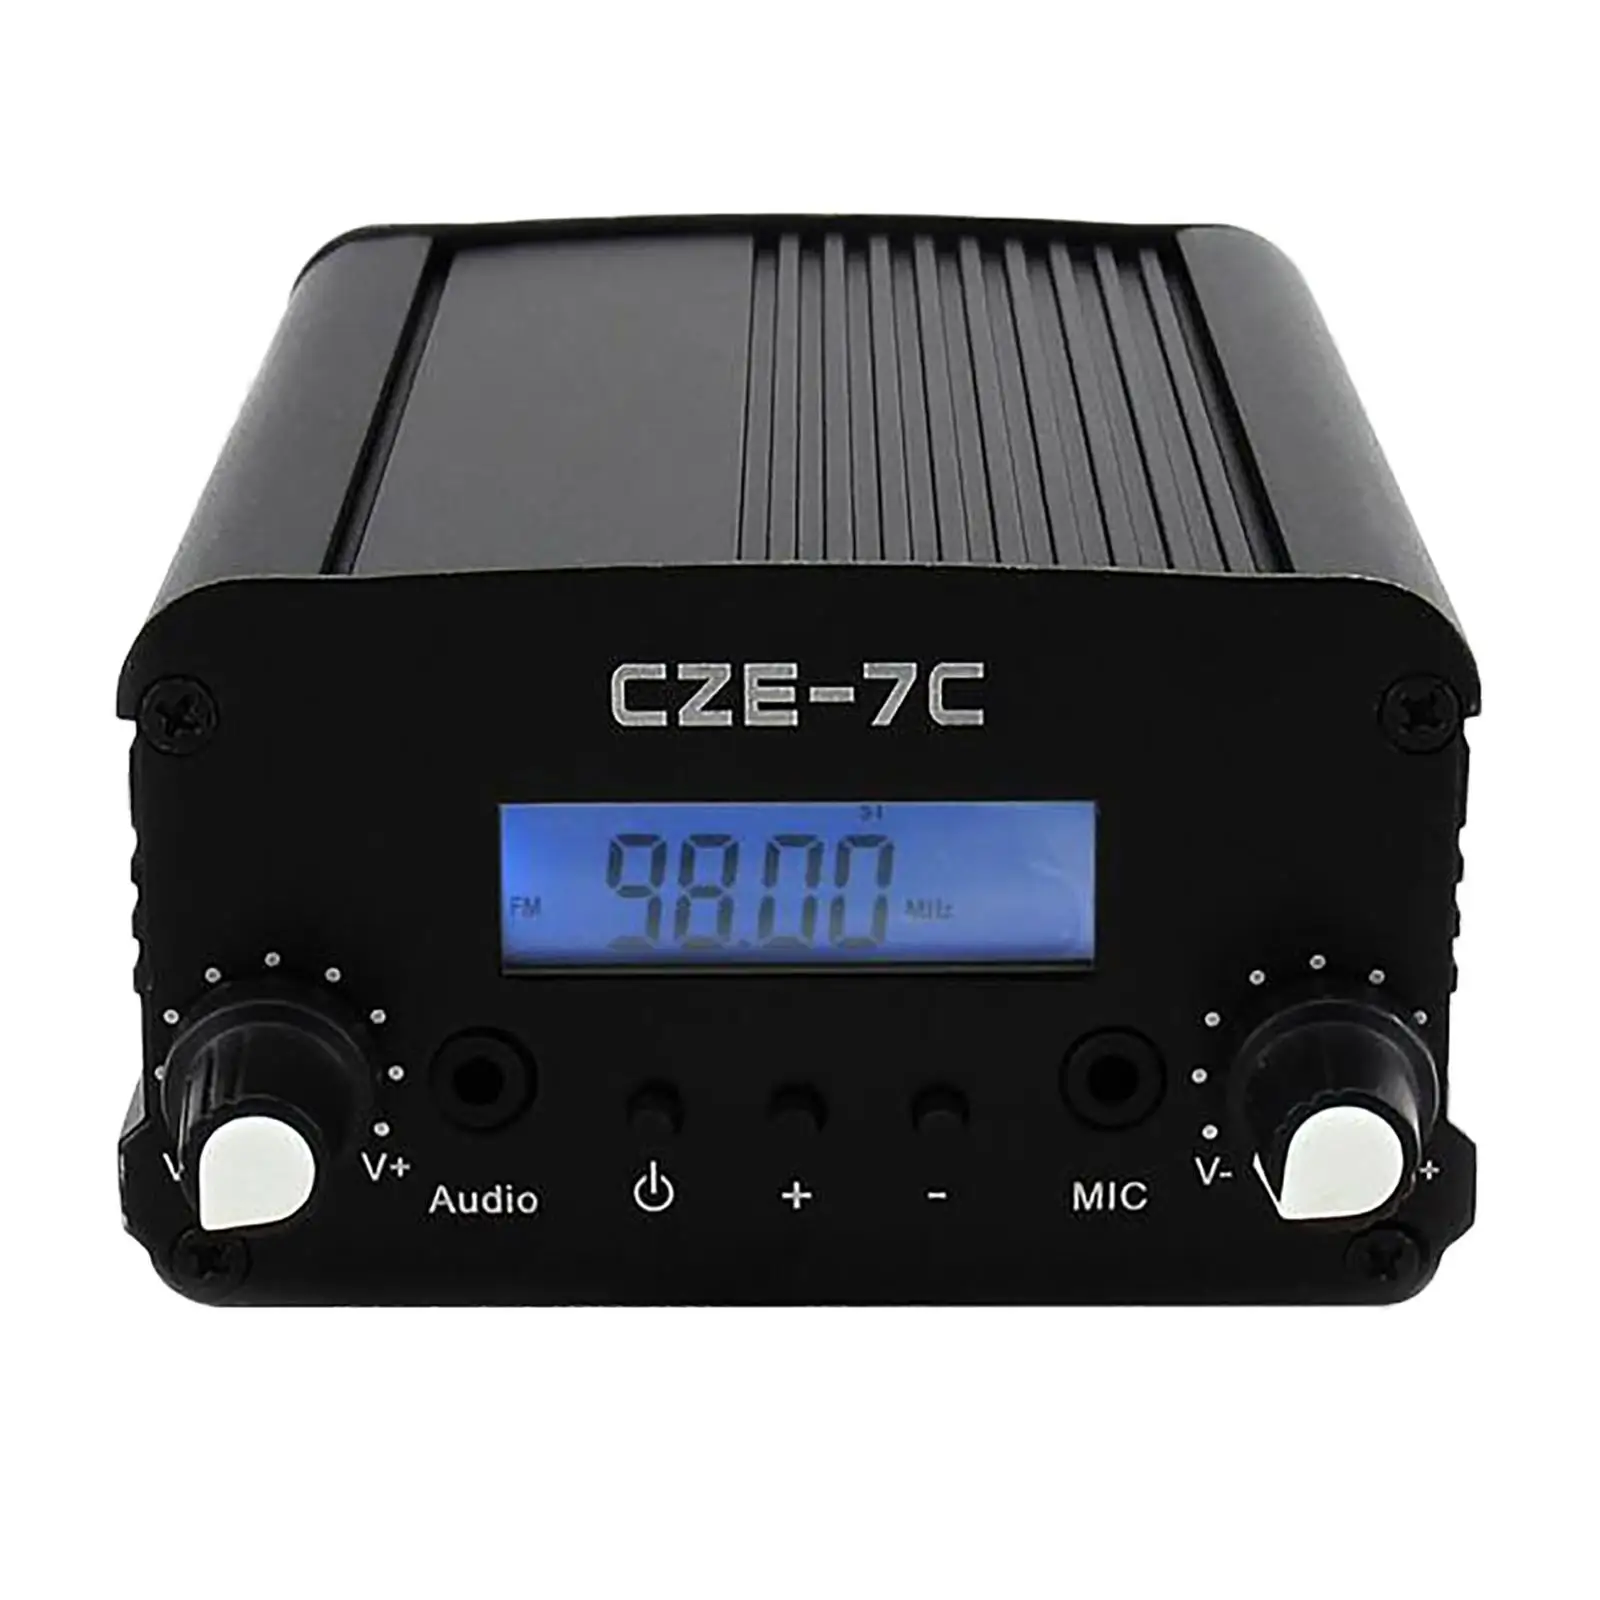 Wireless radio Stereo Black Frequency 76-108MHz for Broadcast Station